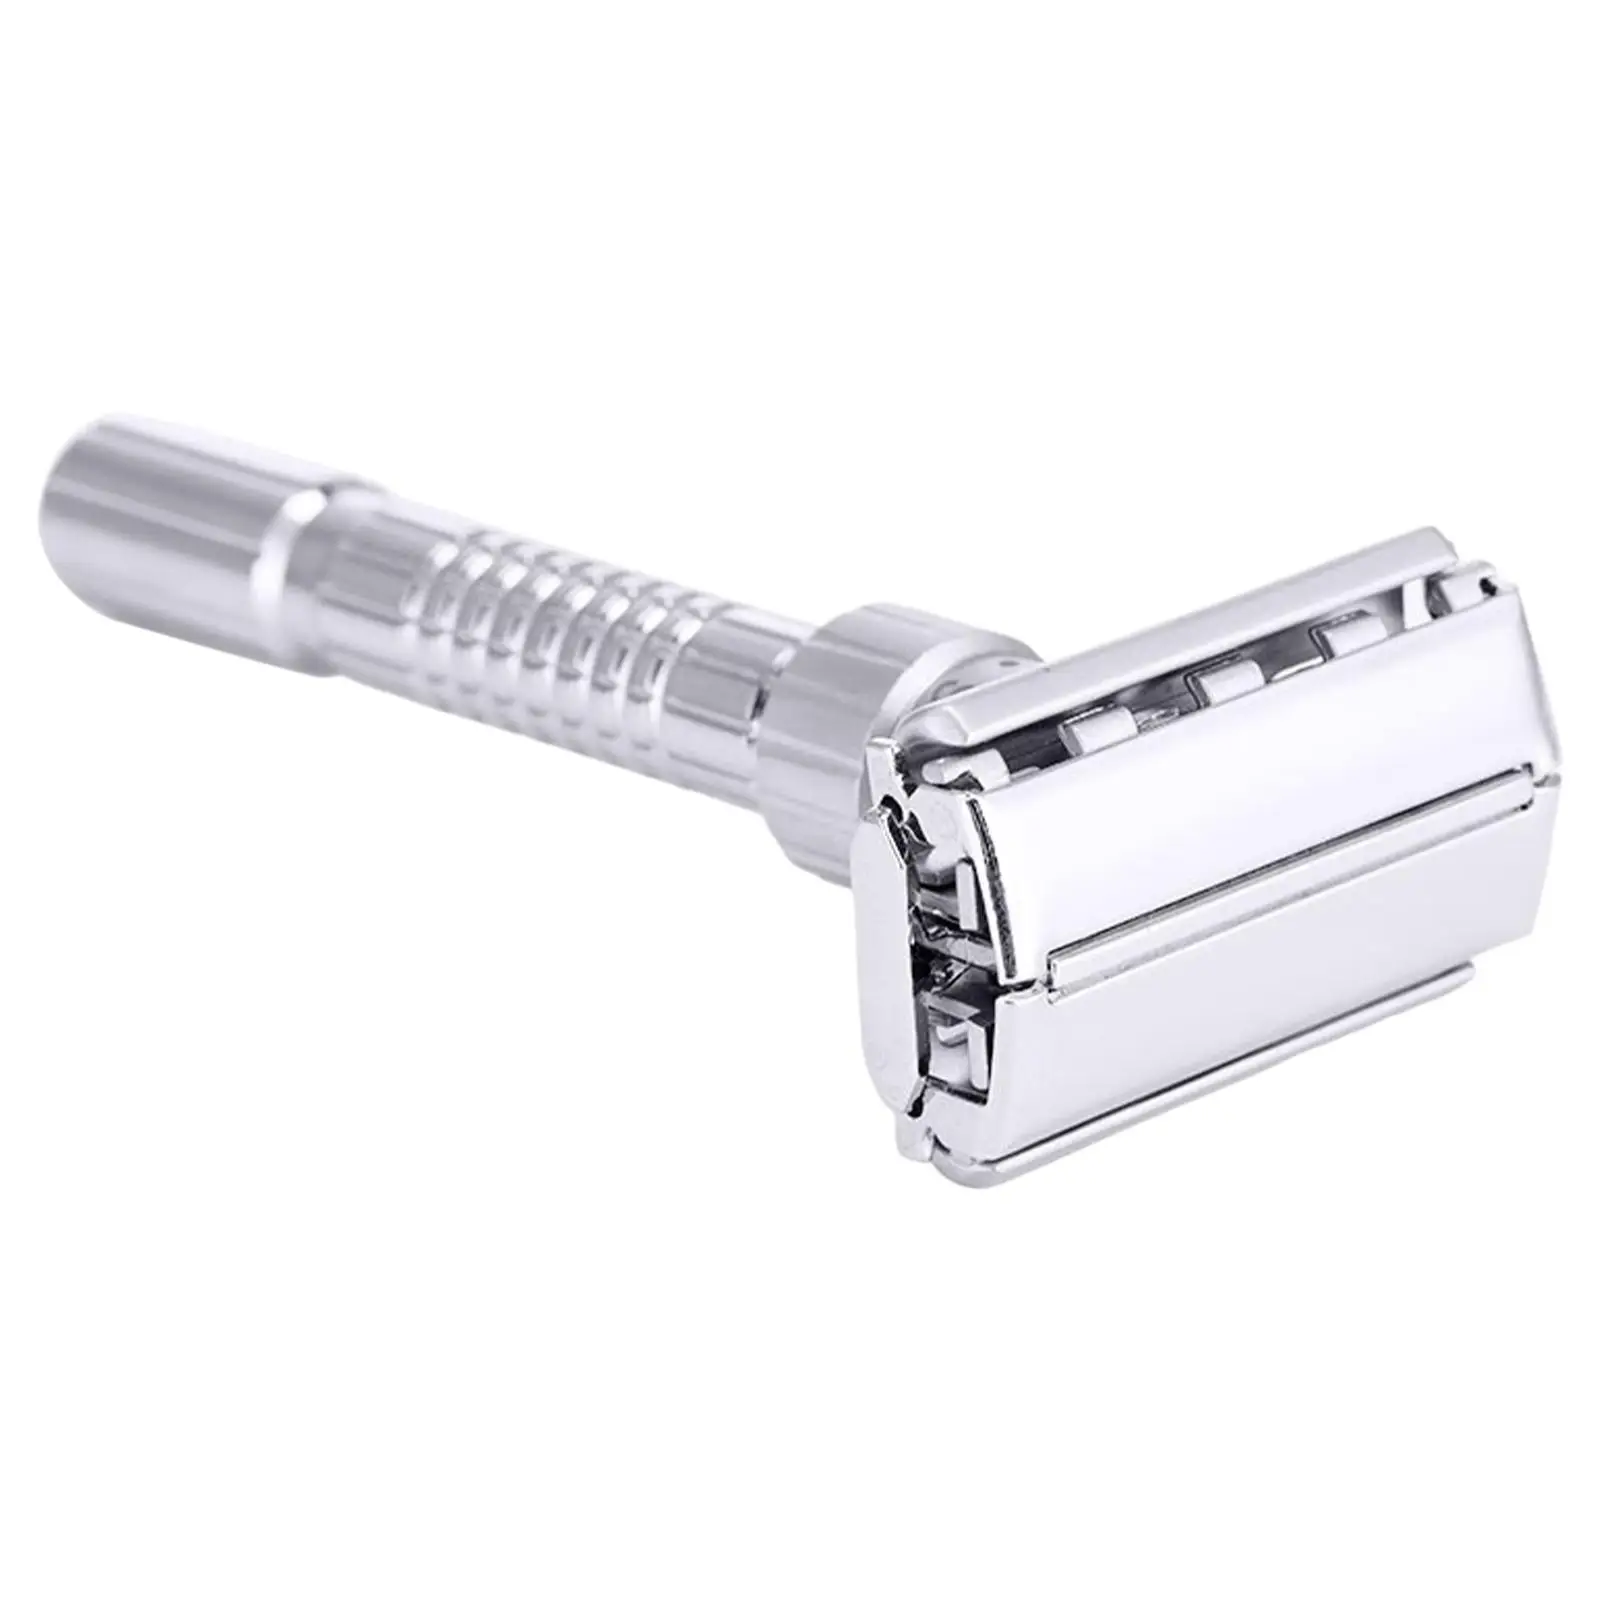 Manual Double Edge Safety Razor Plated with 5 Blades Reusable for Travel Men